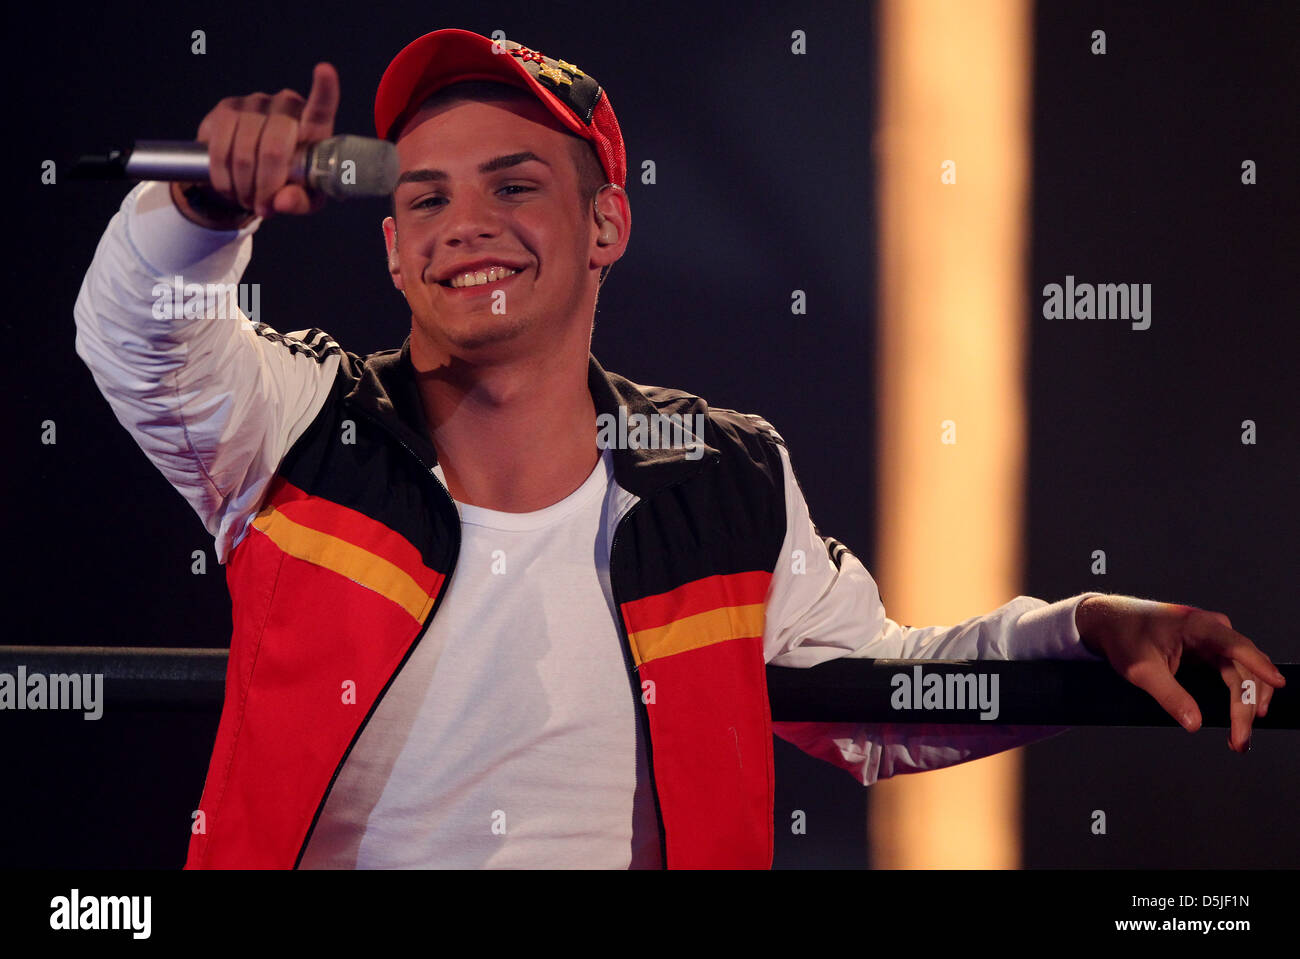 Pietro Lombardi at 'Deutschland sucht den Superstar' (DSDS) Show at MMC Studios. Cologne, Germany Stock Photo